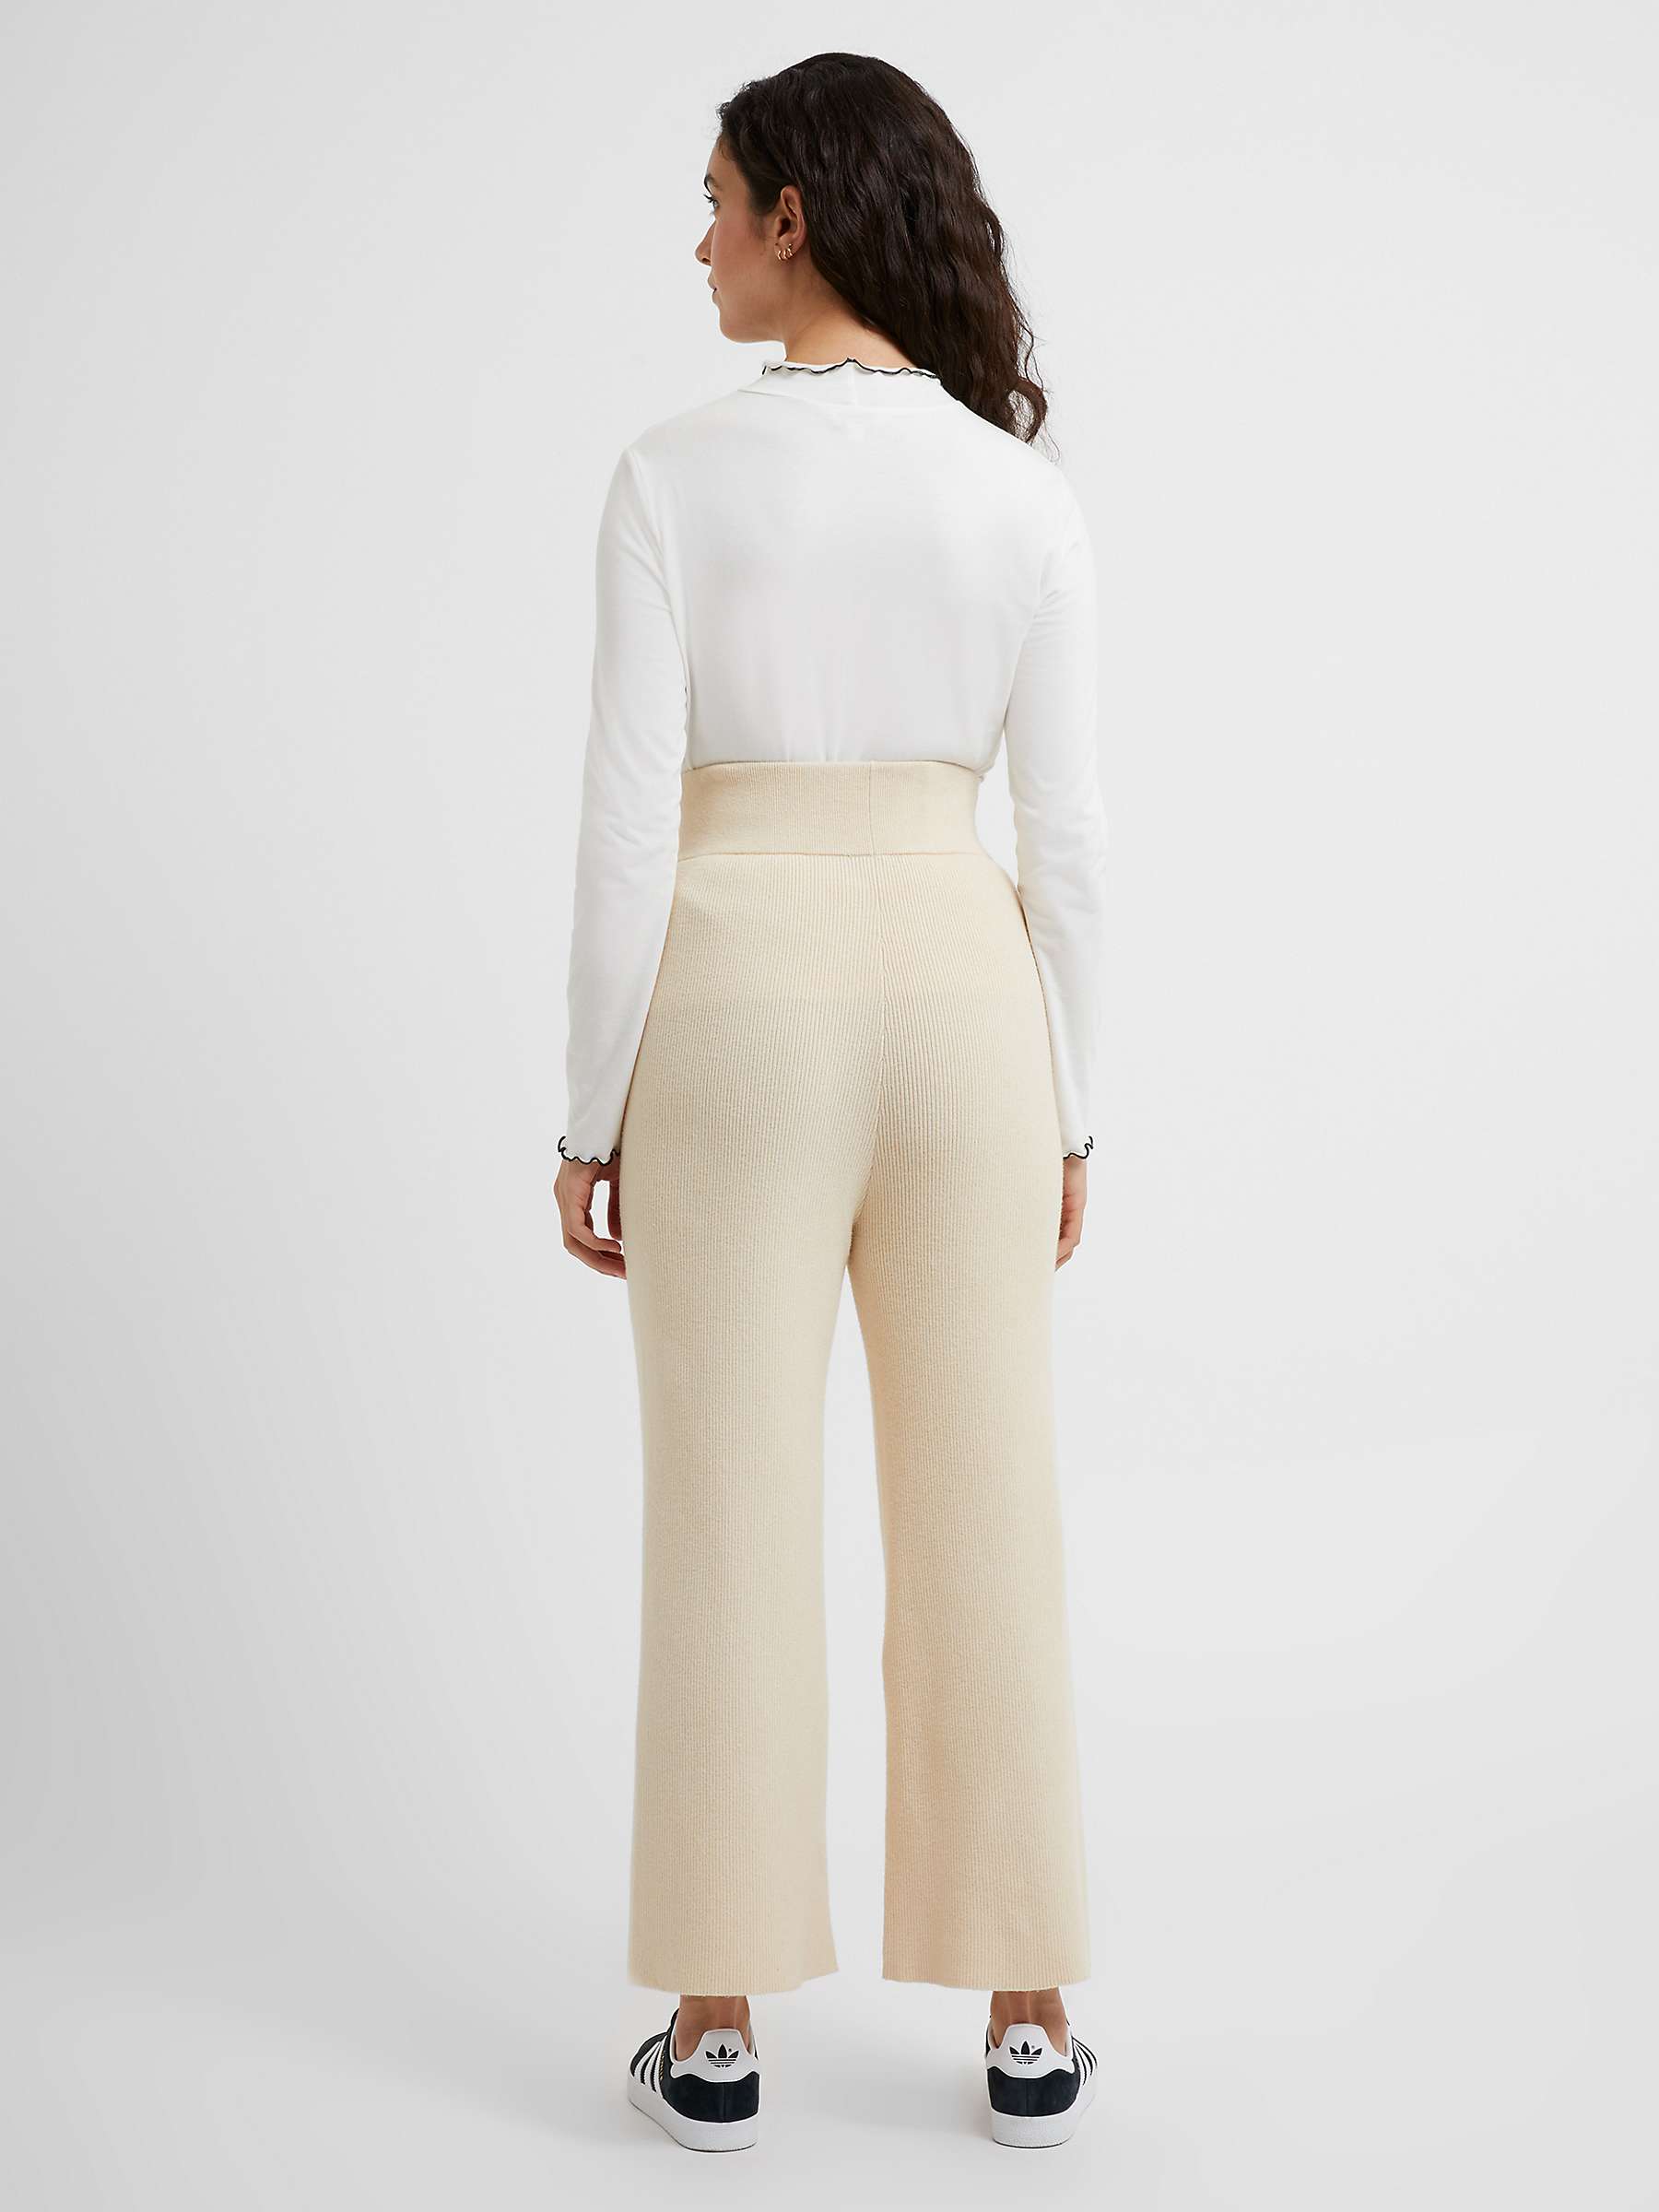 Buy Great Plains Winter Comfort Knit Trousers, Oyster Online at johnlewis.com